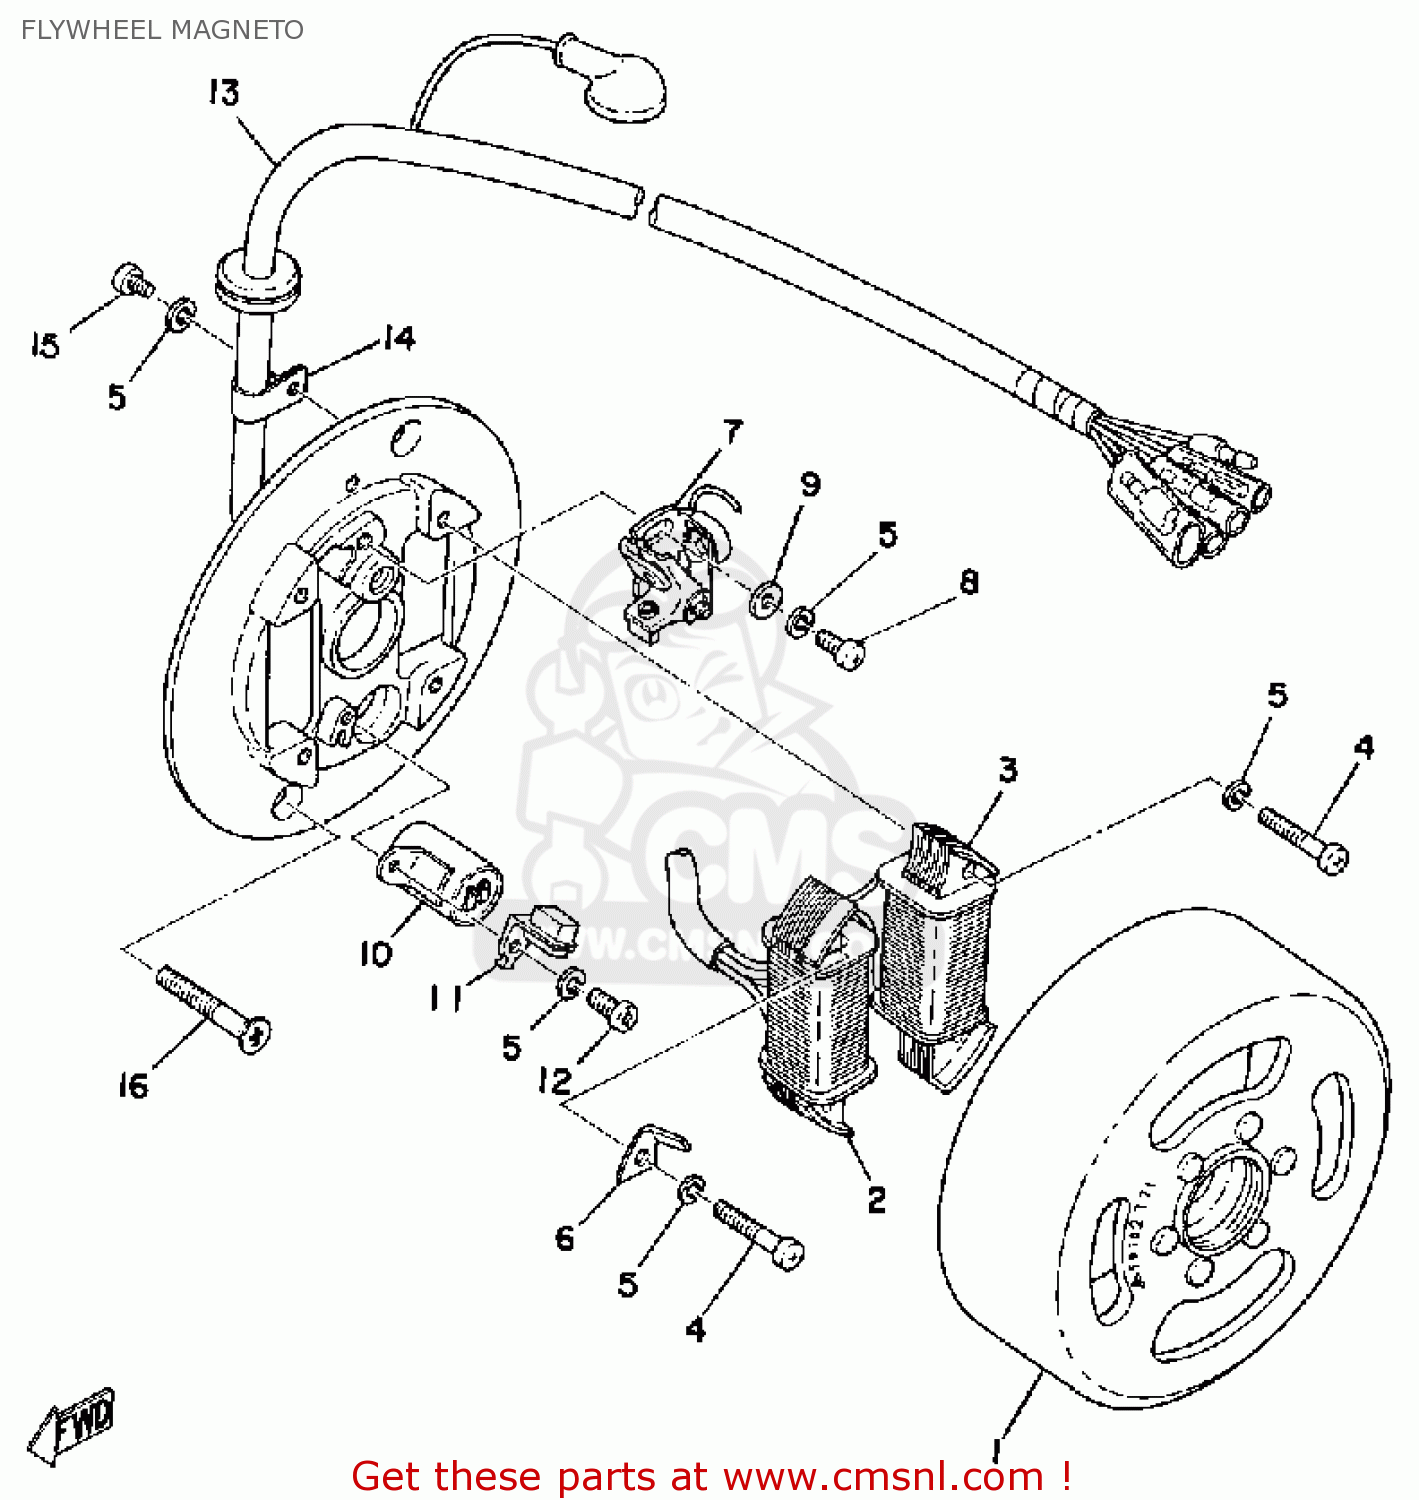 Fdc75e Wiring Diagram Of Yamaha Rs 100 Wiring Resources